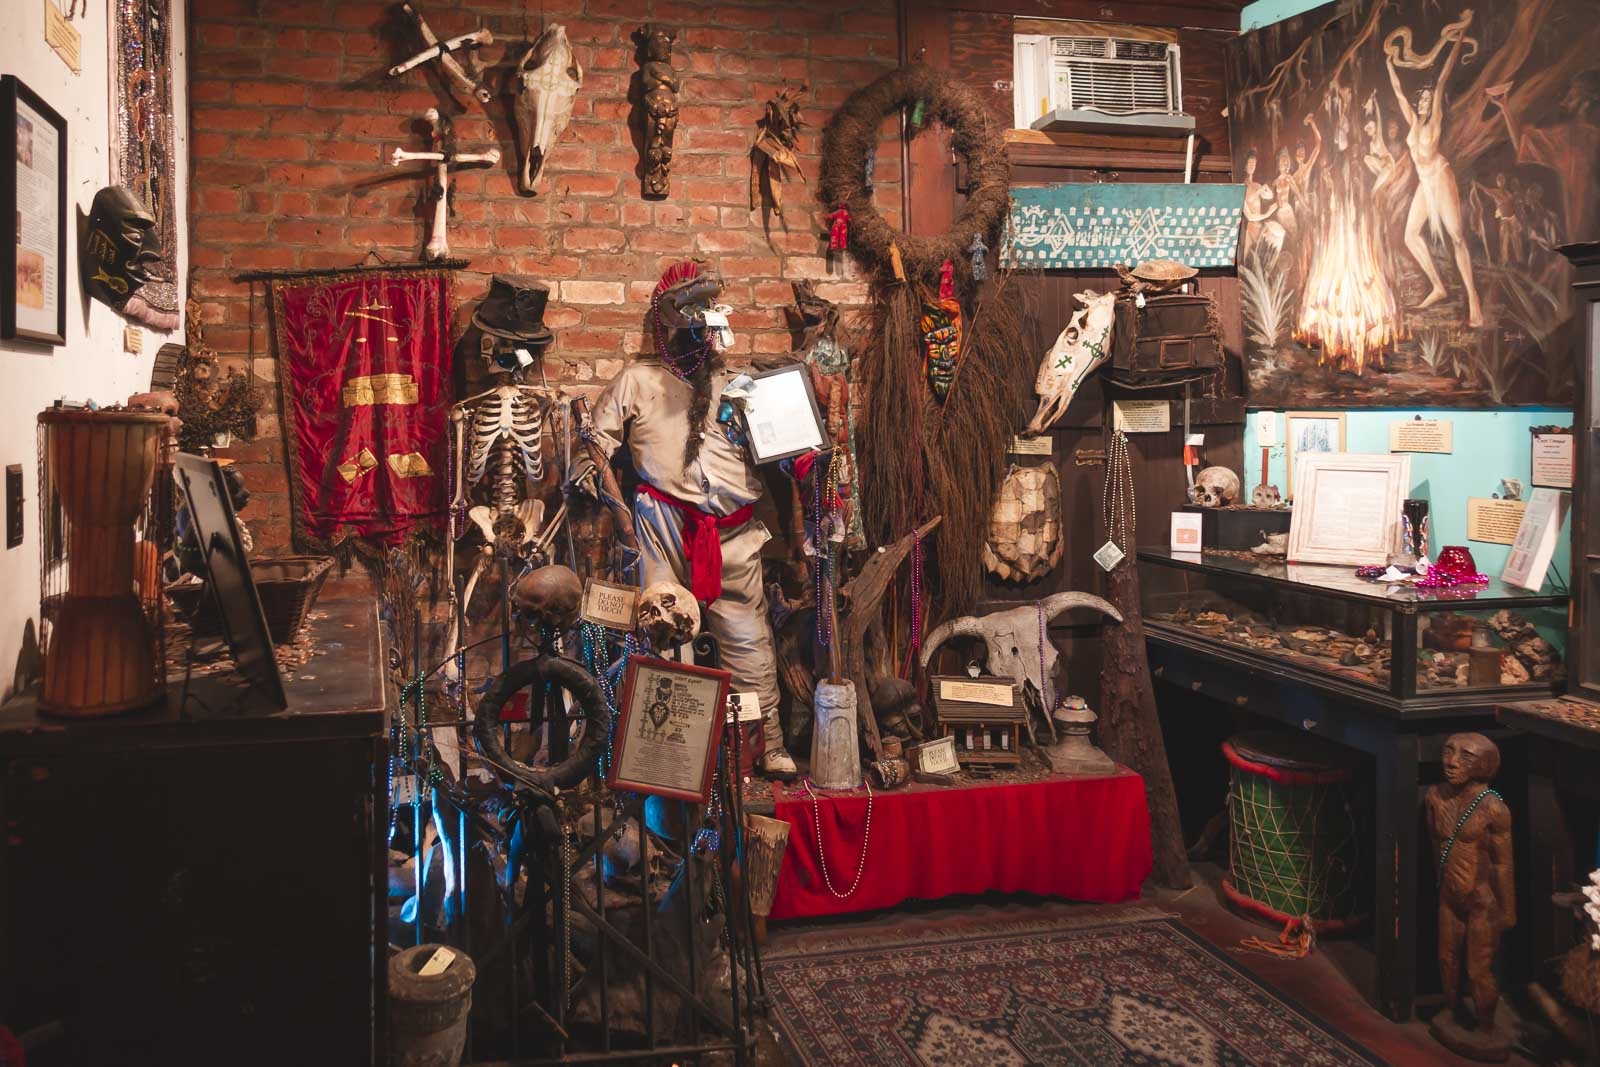 museums to visit in new orleans - Voodoo Museum interior with masks and skulls on display